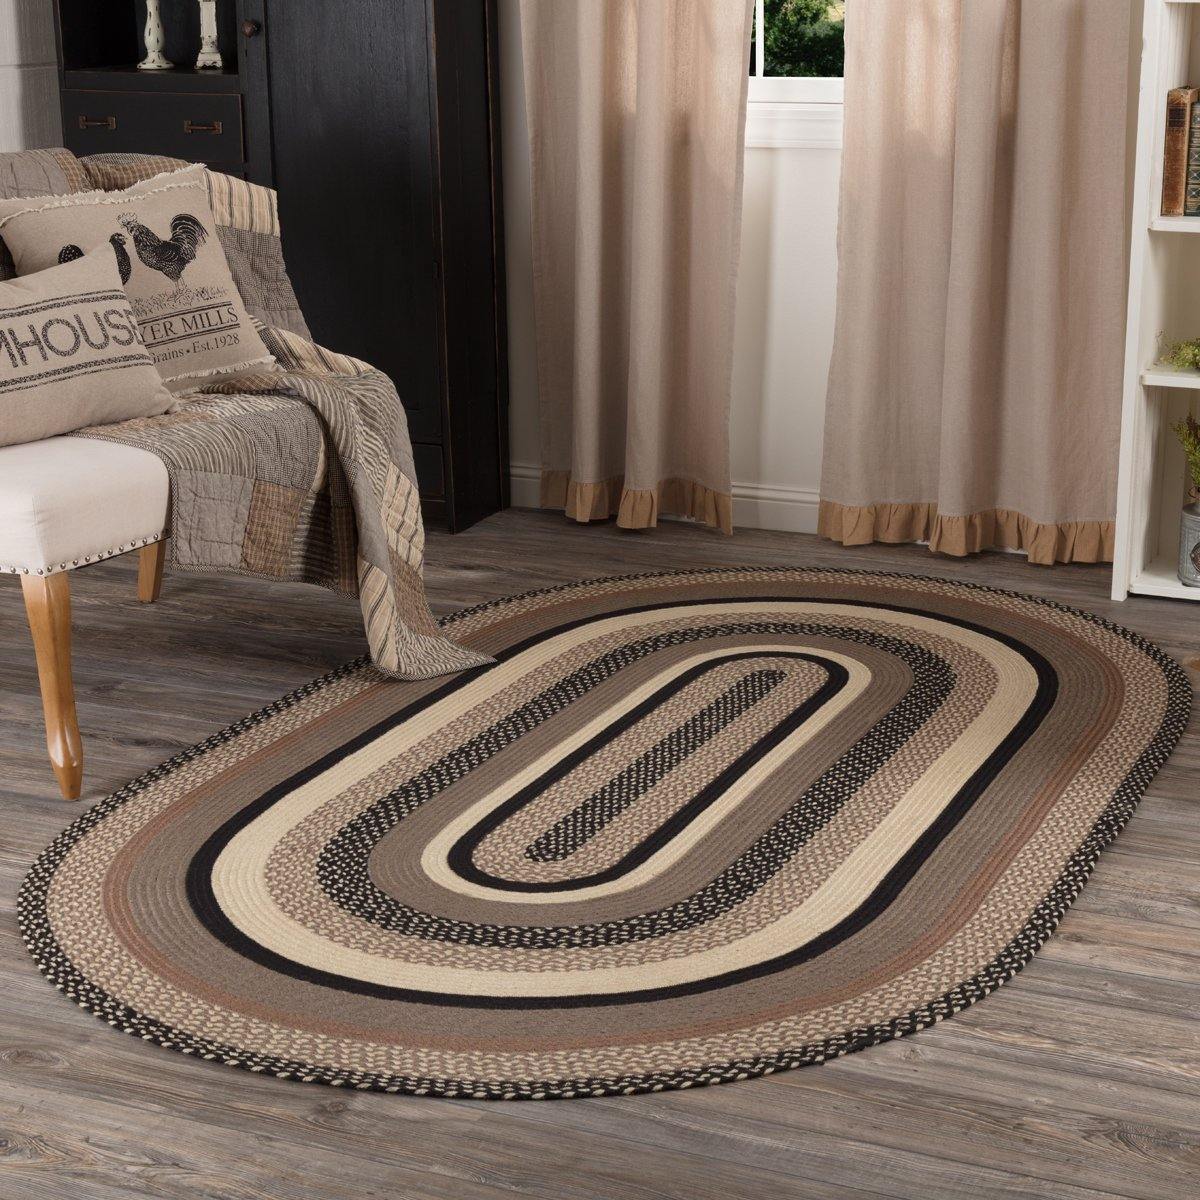 Sawyer Mill Charcoal Jute Braided Rug Oval 5'x8' with Rug Pad VHC Brands - The Fox Decor